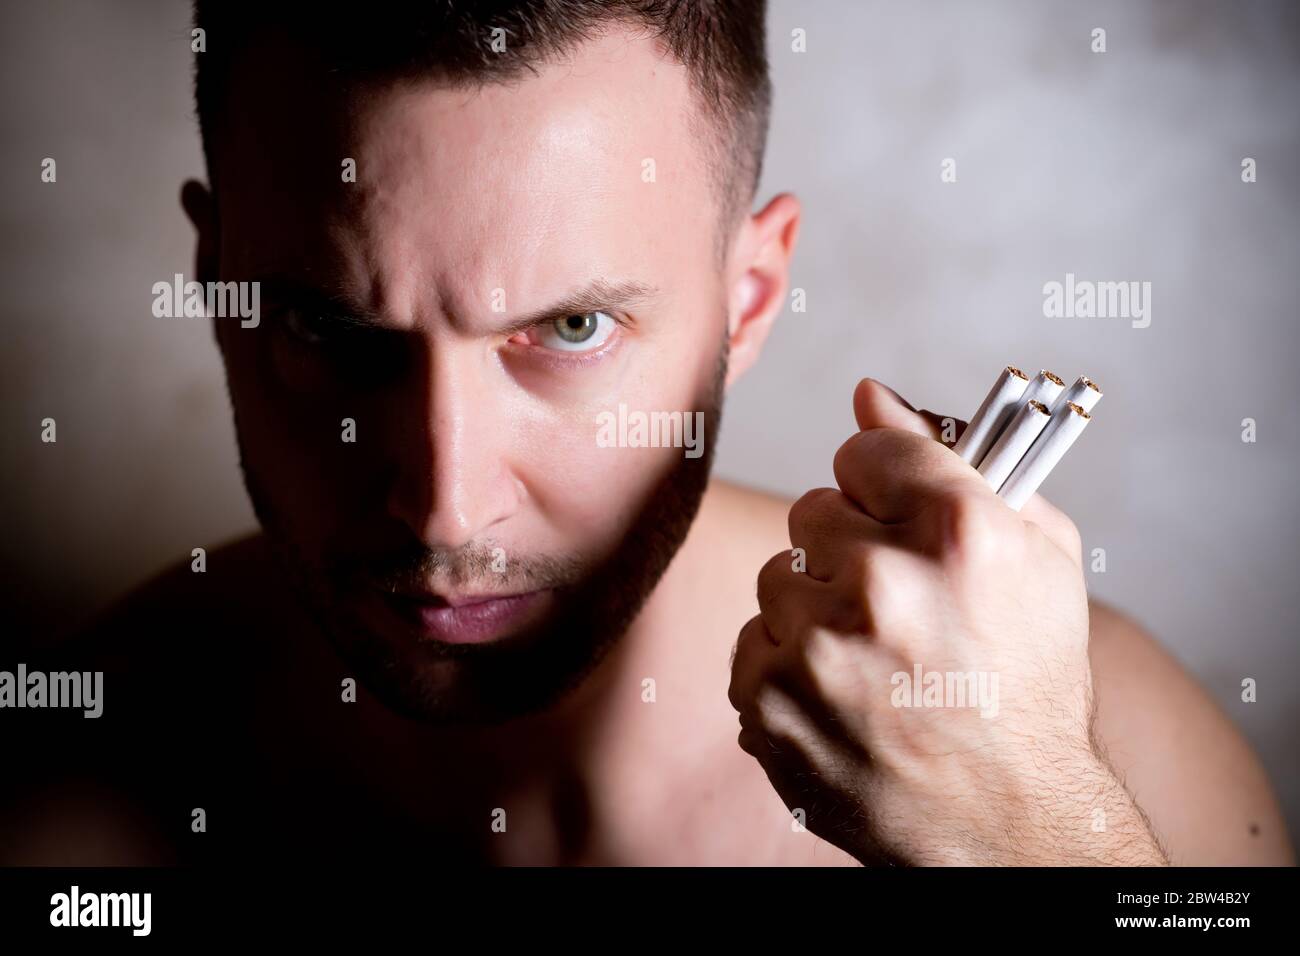 unshaven man stares sternly at the camera, clutching cigarettes in his fist. close up, side lighting, contrast light Stock Photo